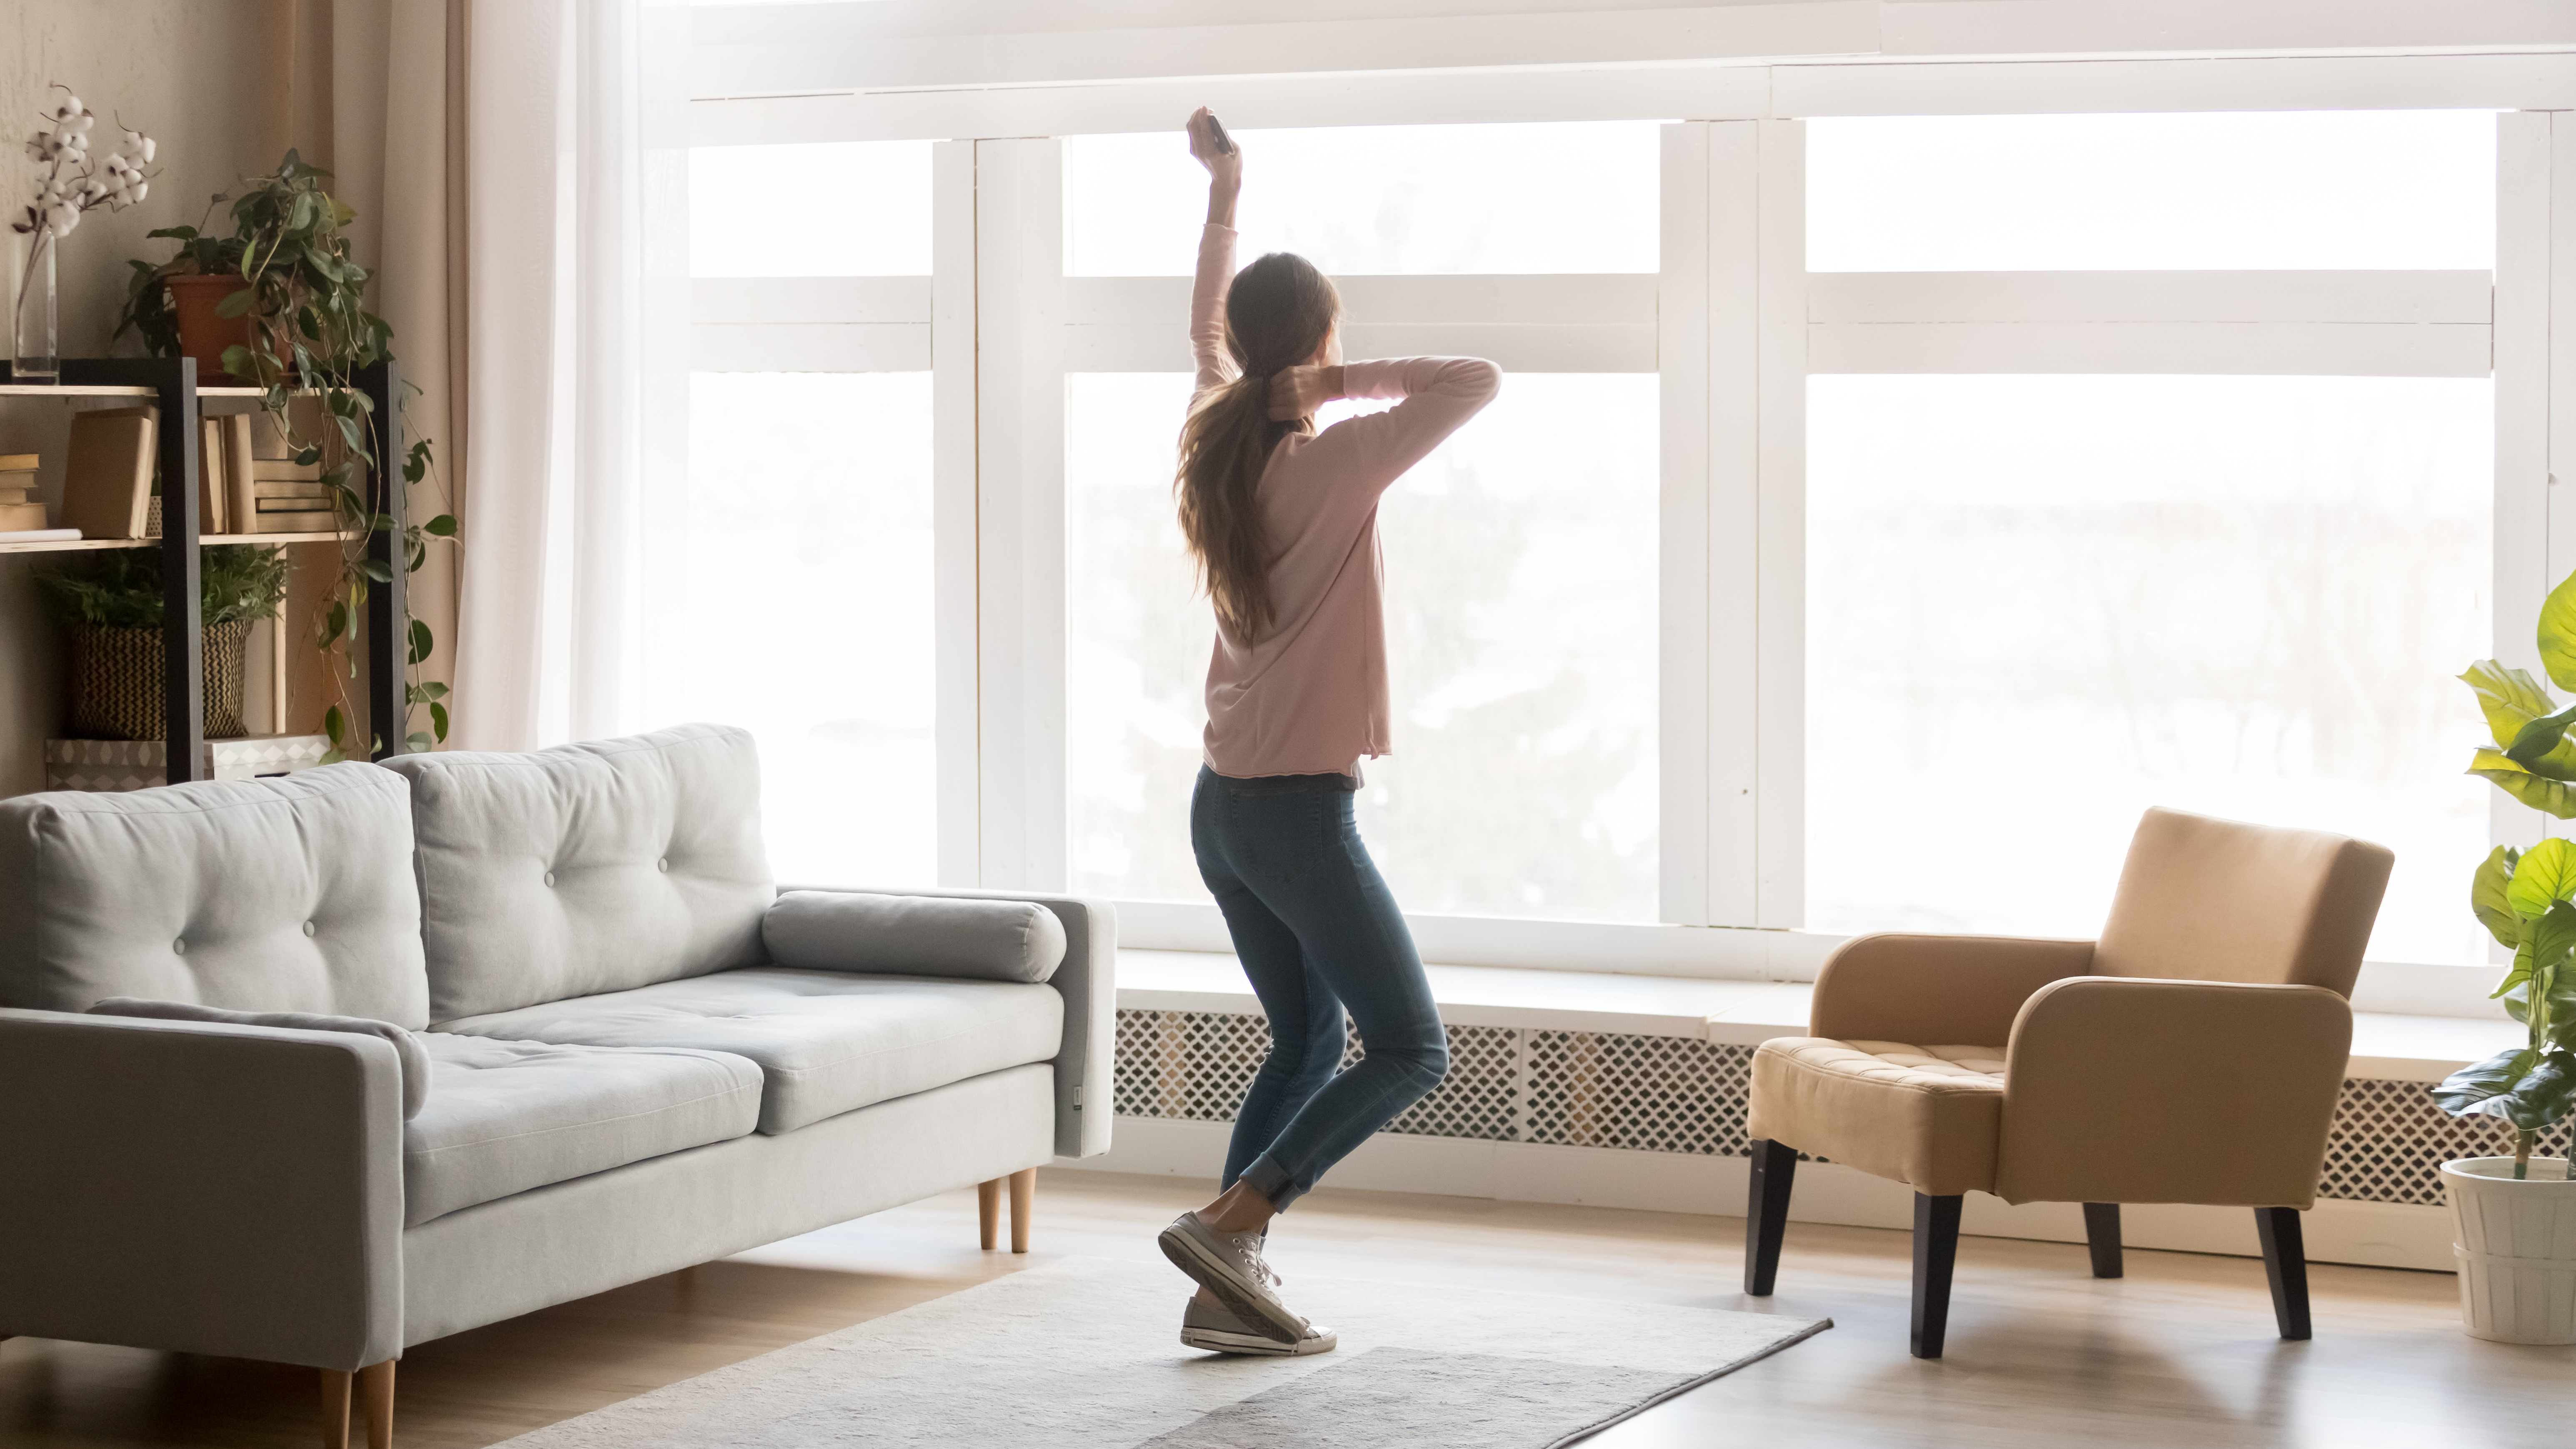 A woman dancing in a new home  | Source: Shutterstock